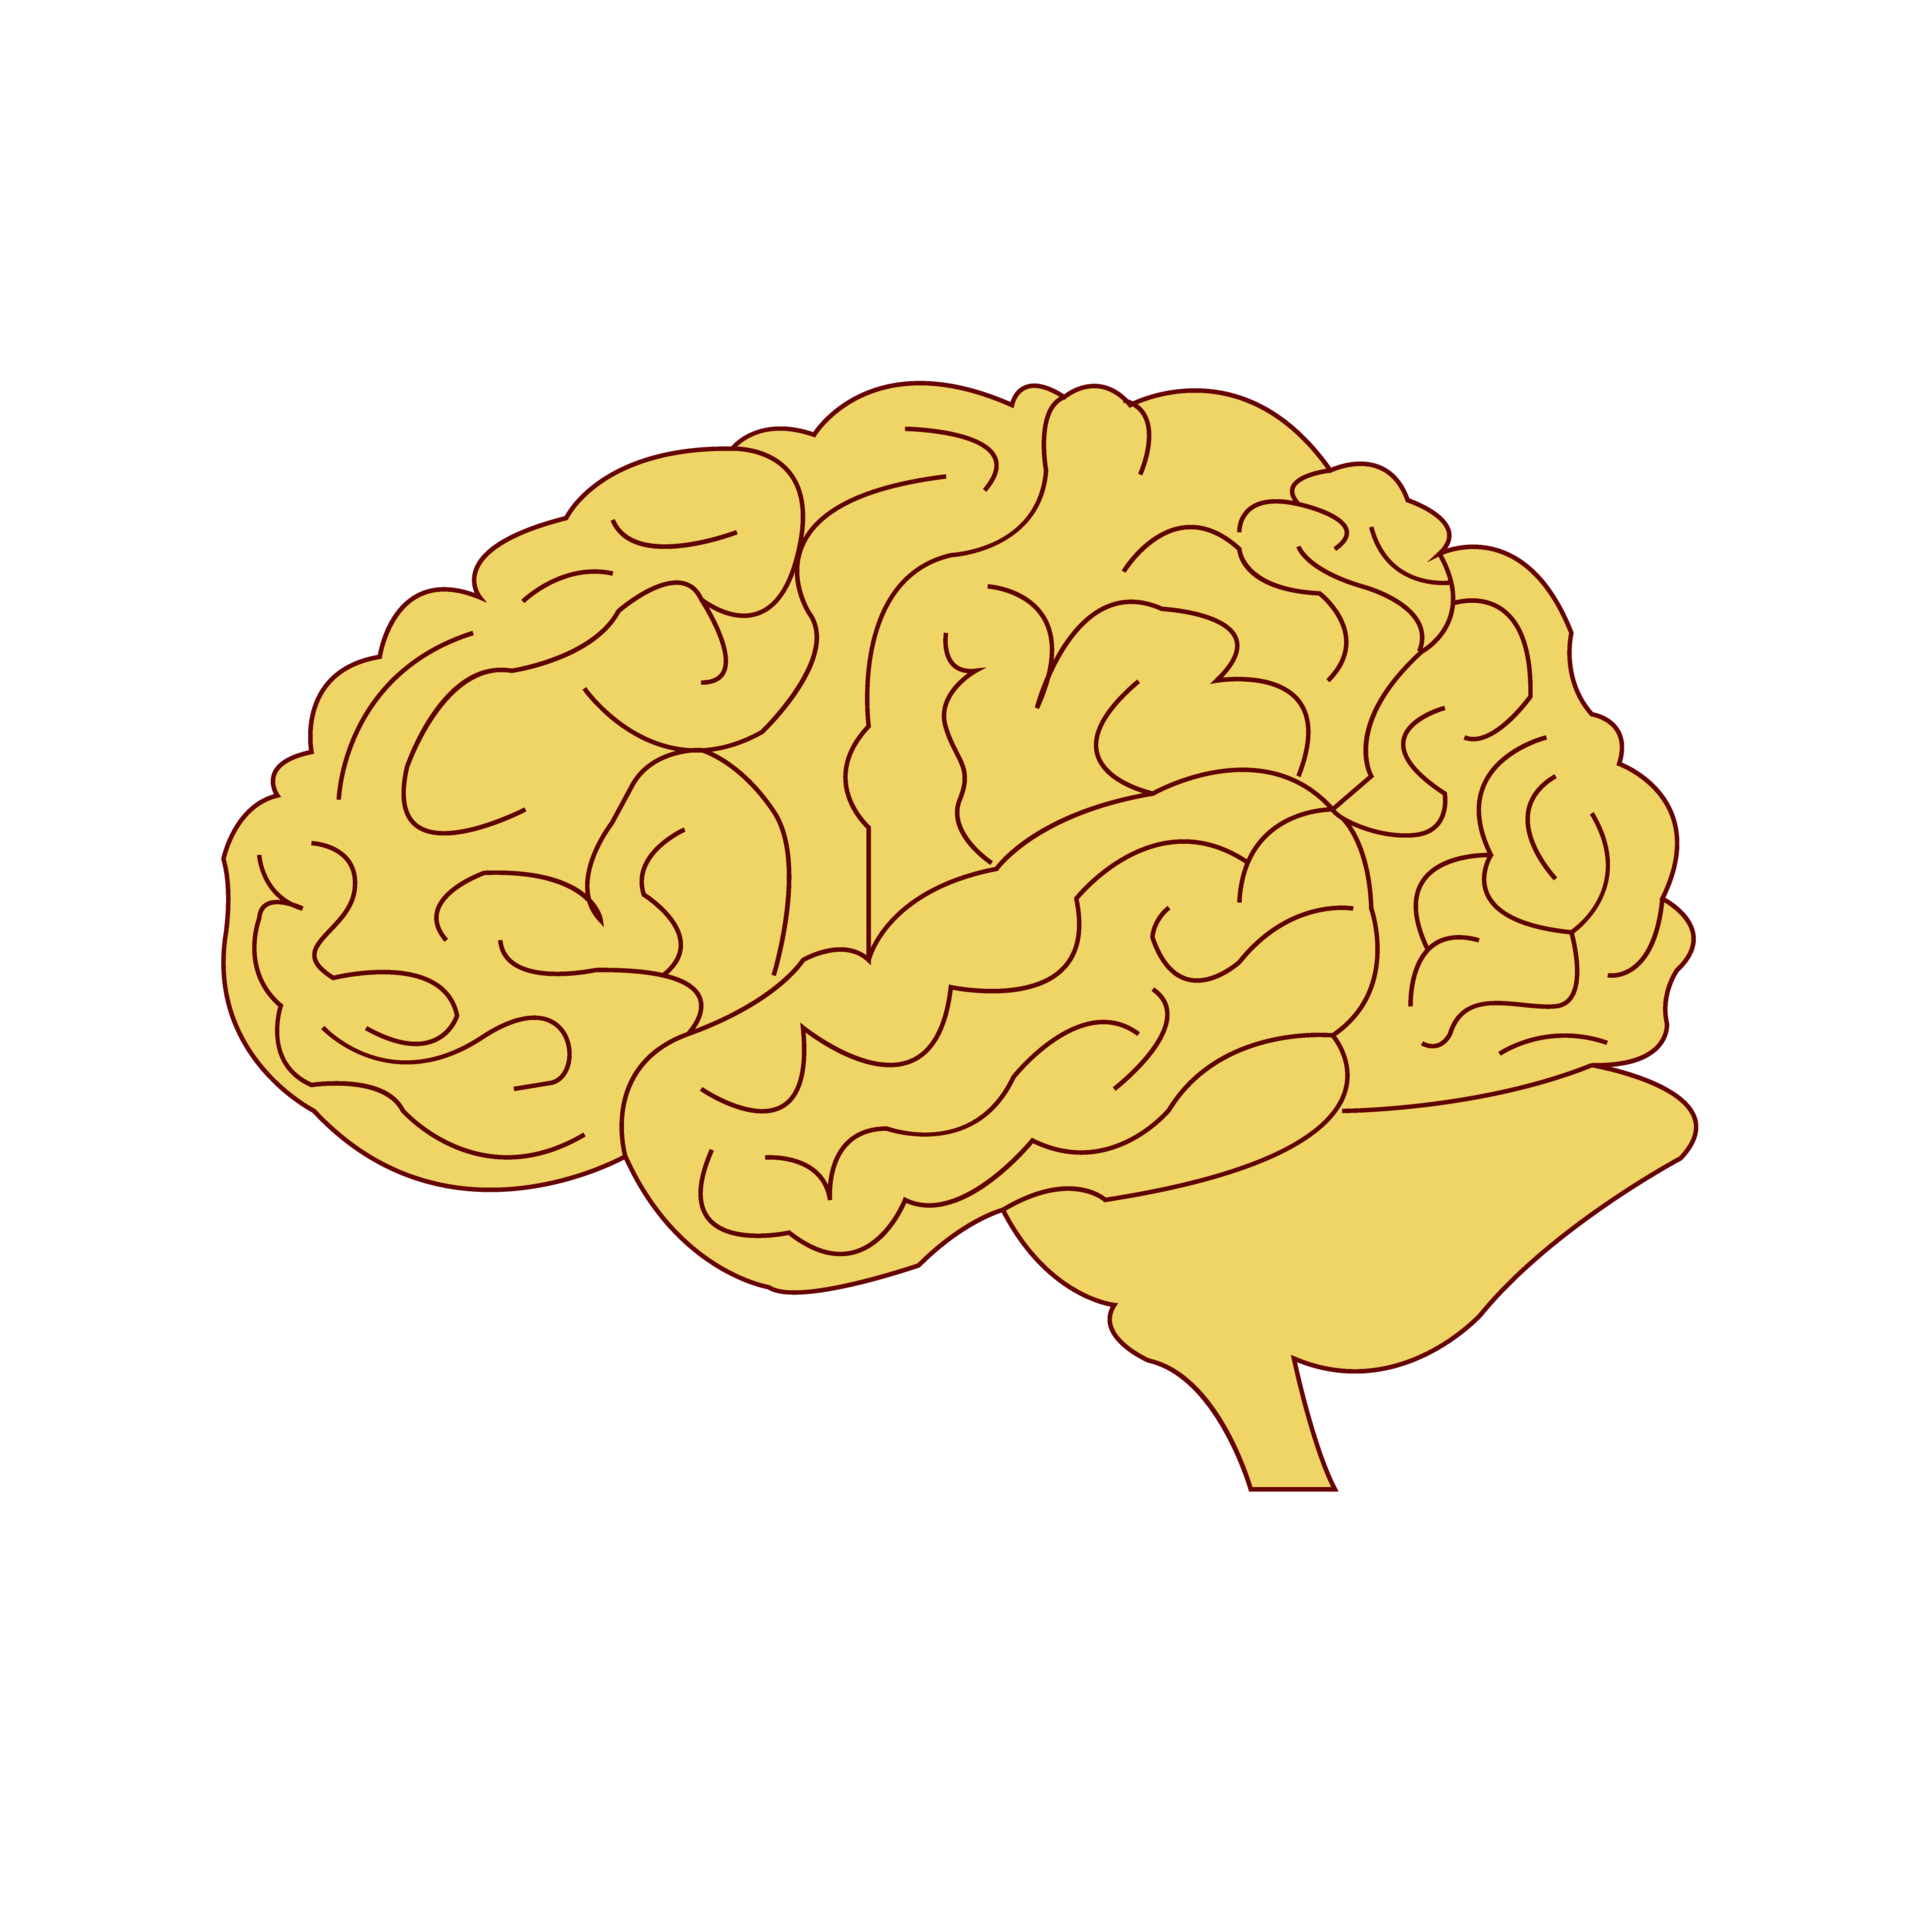 sign of the brain symbol 21008045 PNG